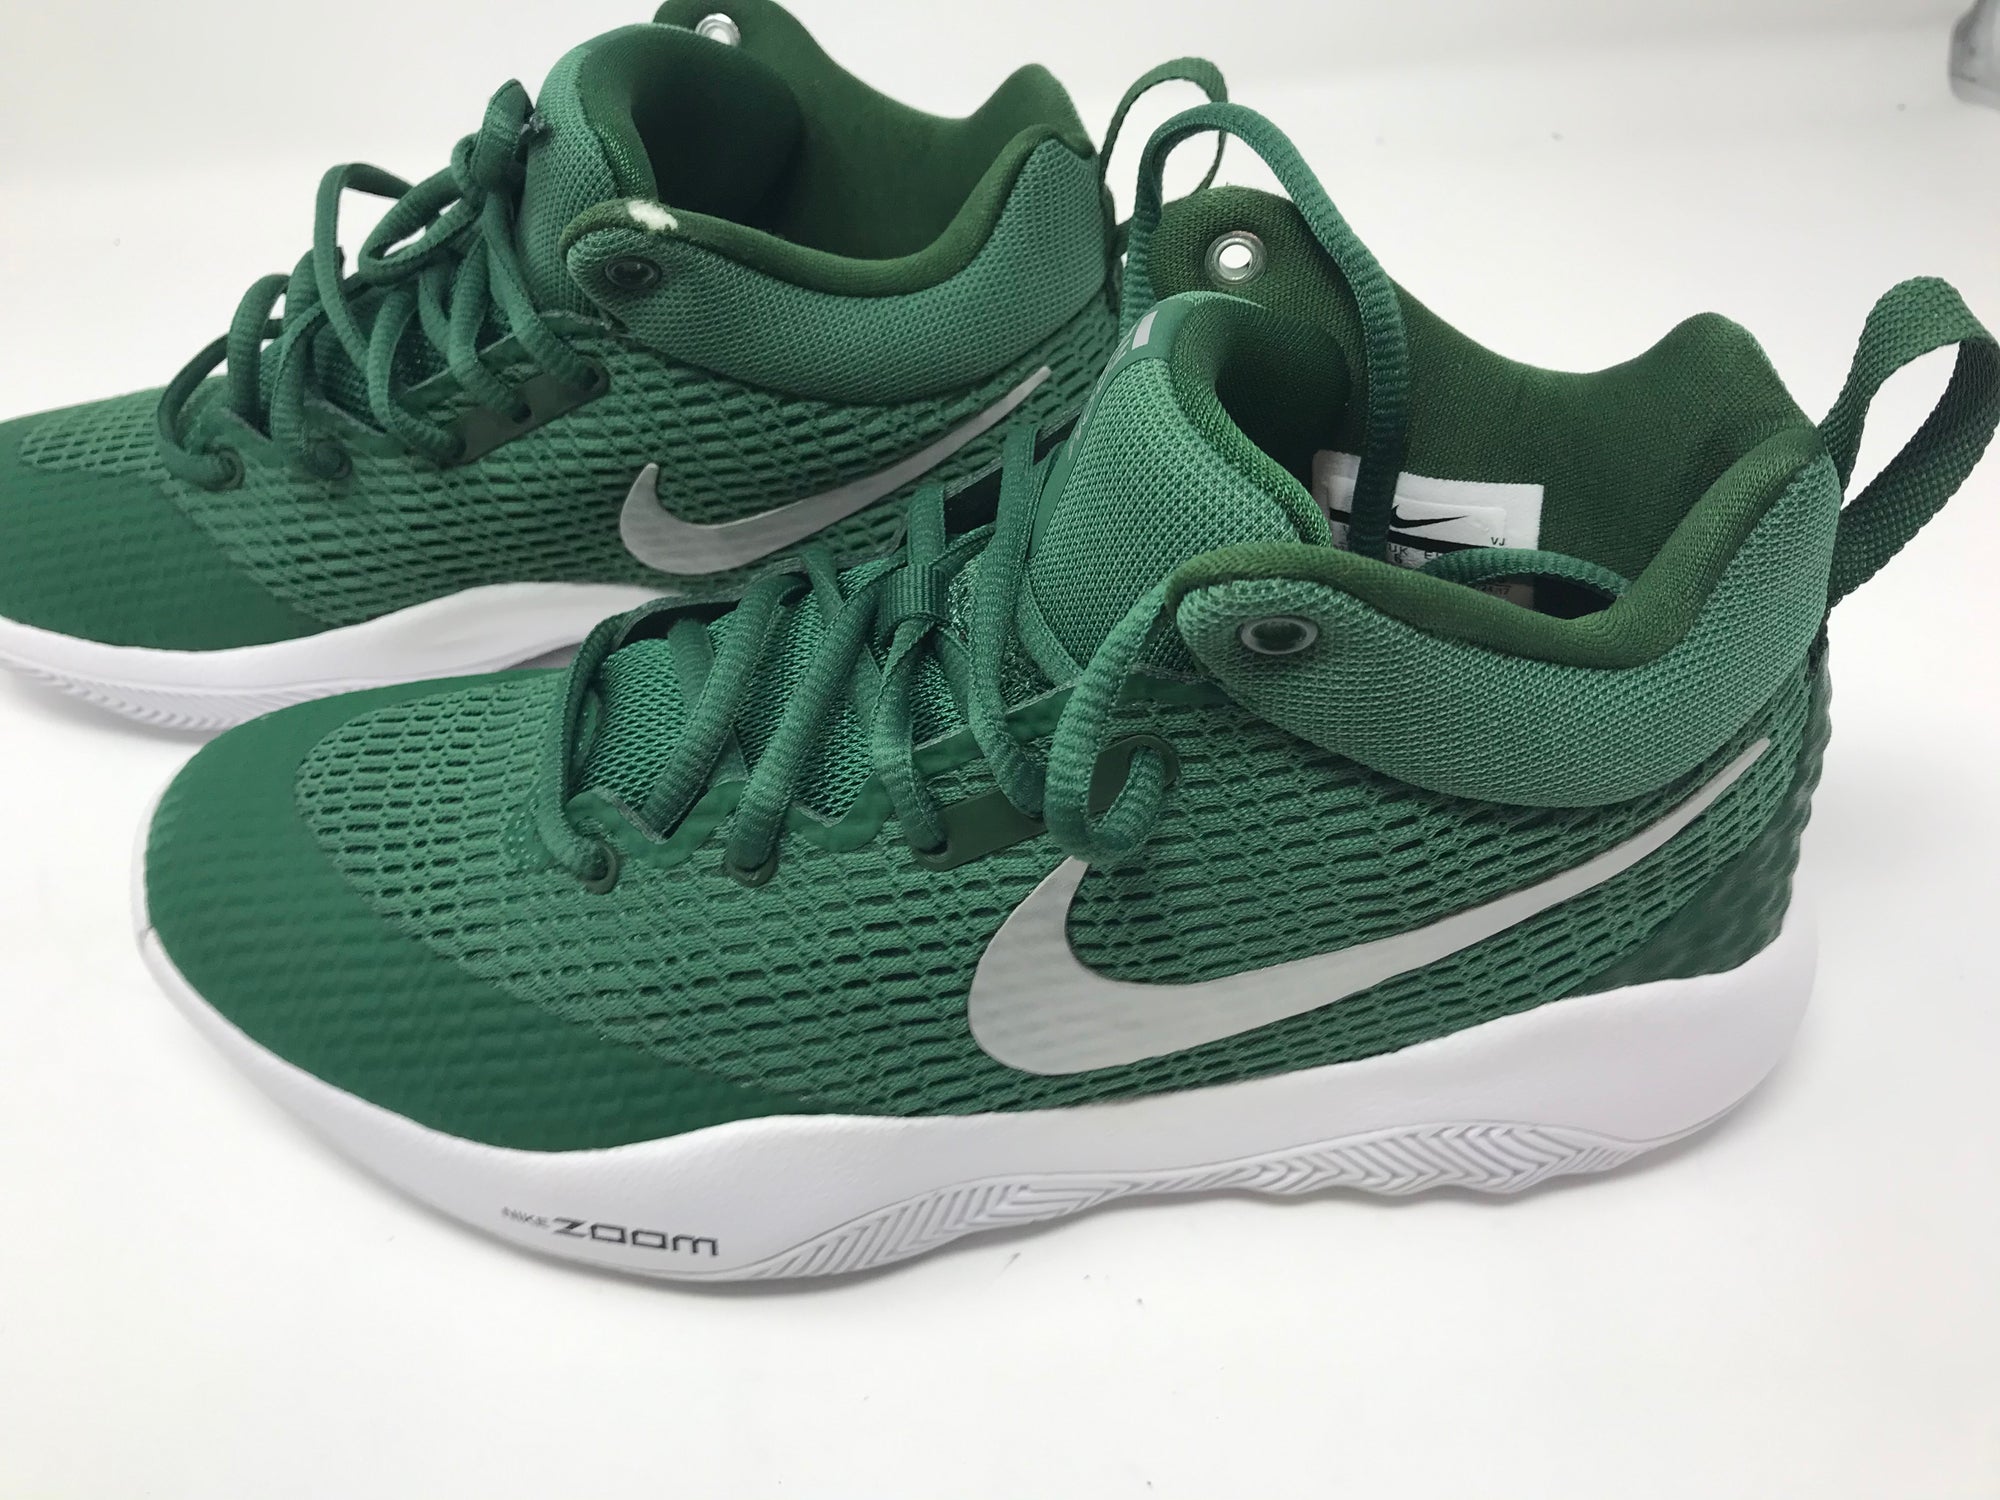 New Other Nike Zoom Basketball Shoes Men 6.5/Wmn 8 Green/Silver – PremierSports